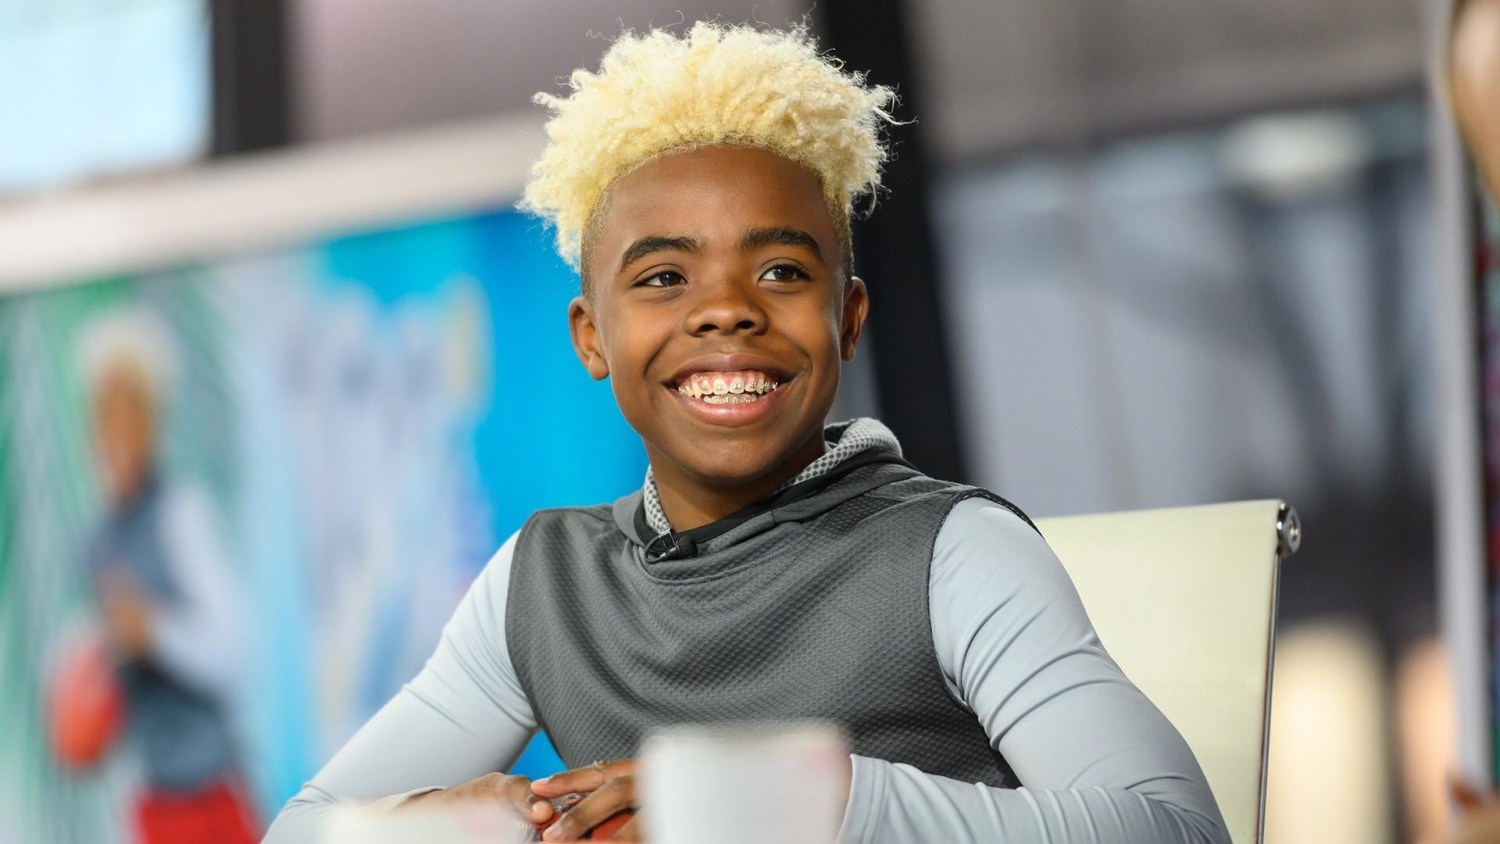 Meet Maxwell 'Bunchie' Young, the 'NFL Kid' behind that Super Bowl ad